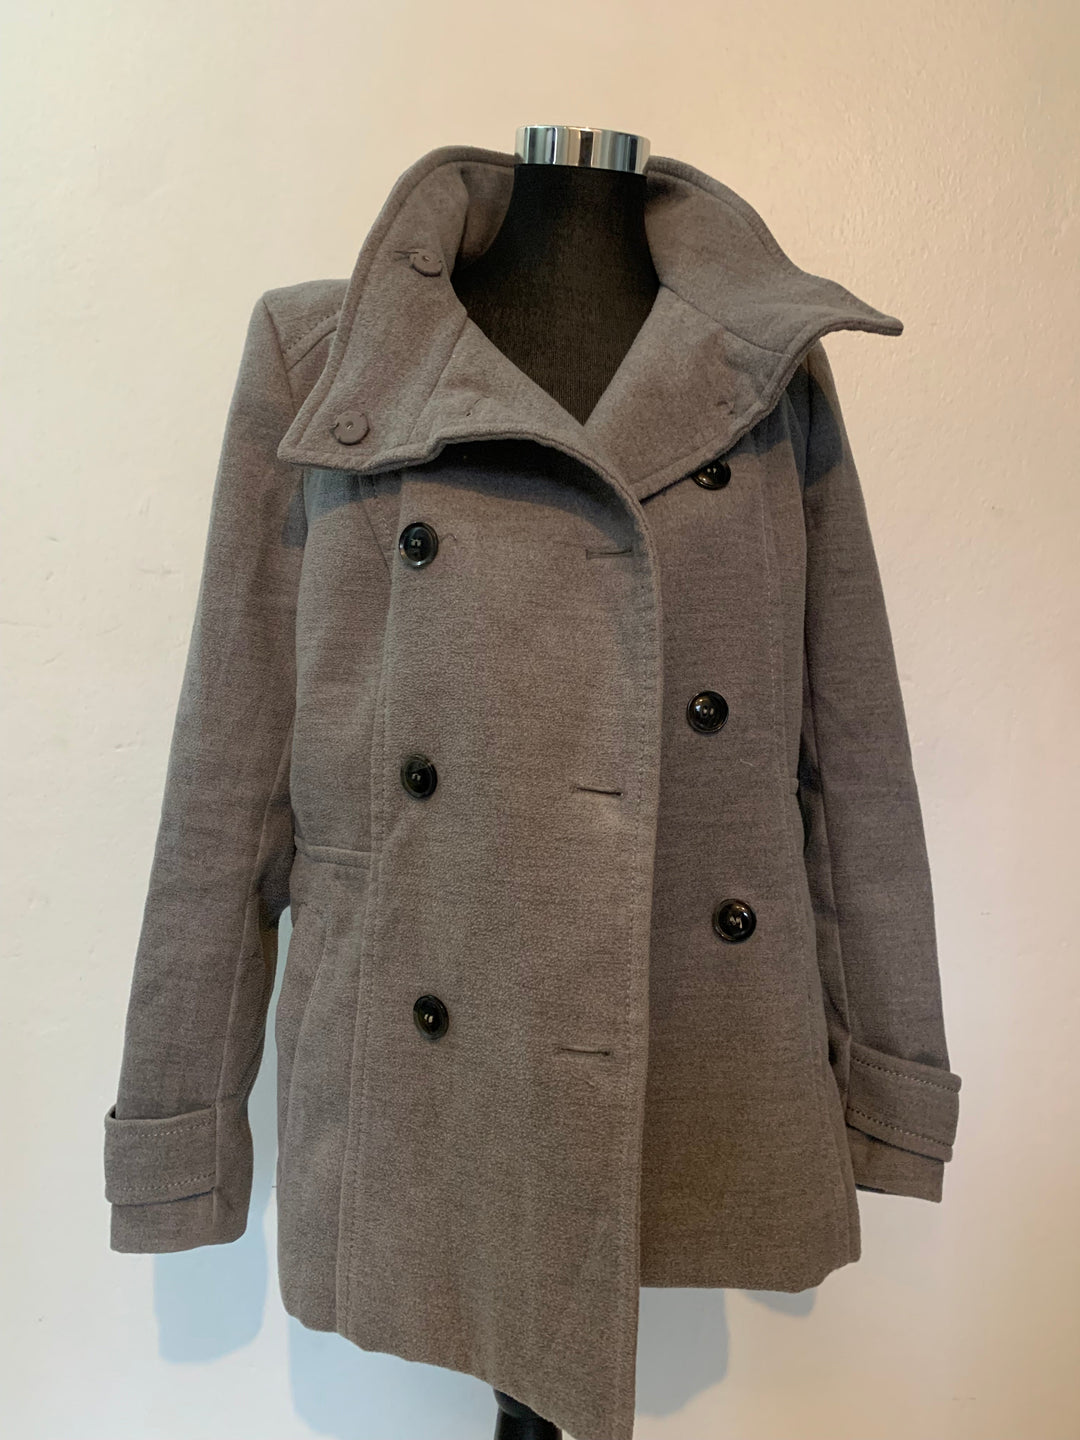 Image of Winter coat size 34, great condition